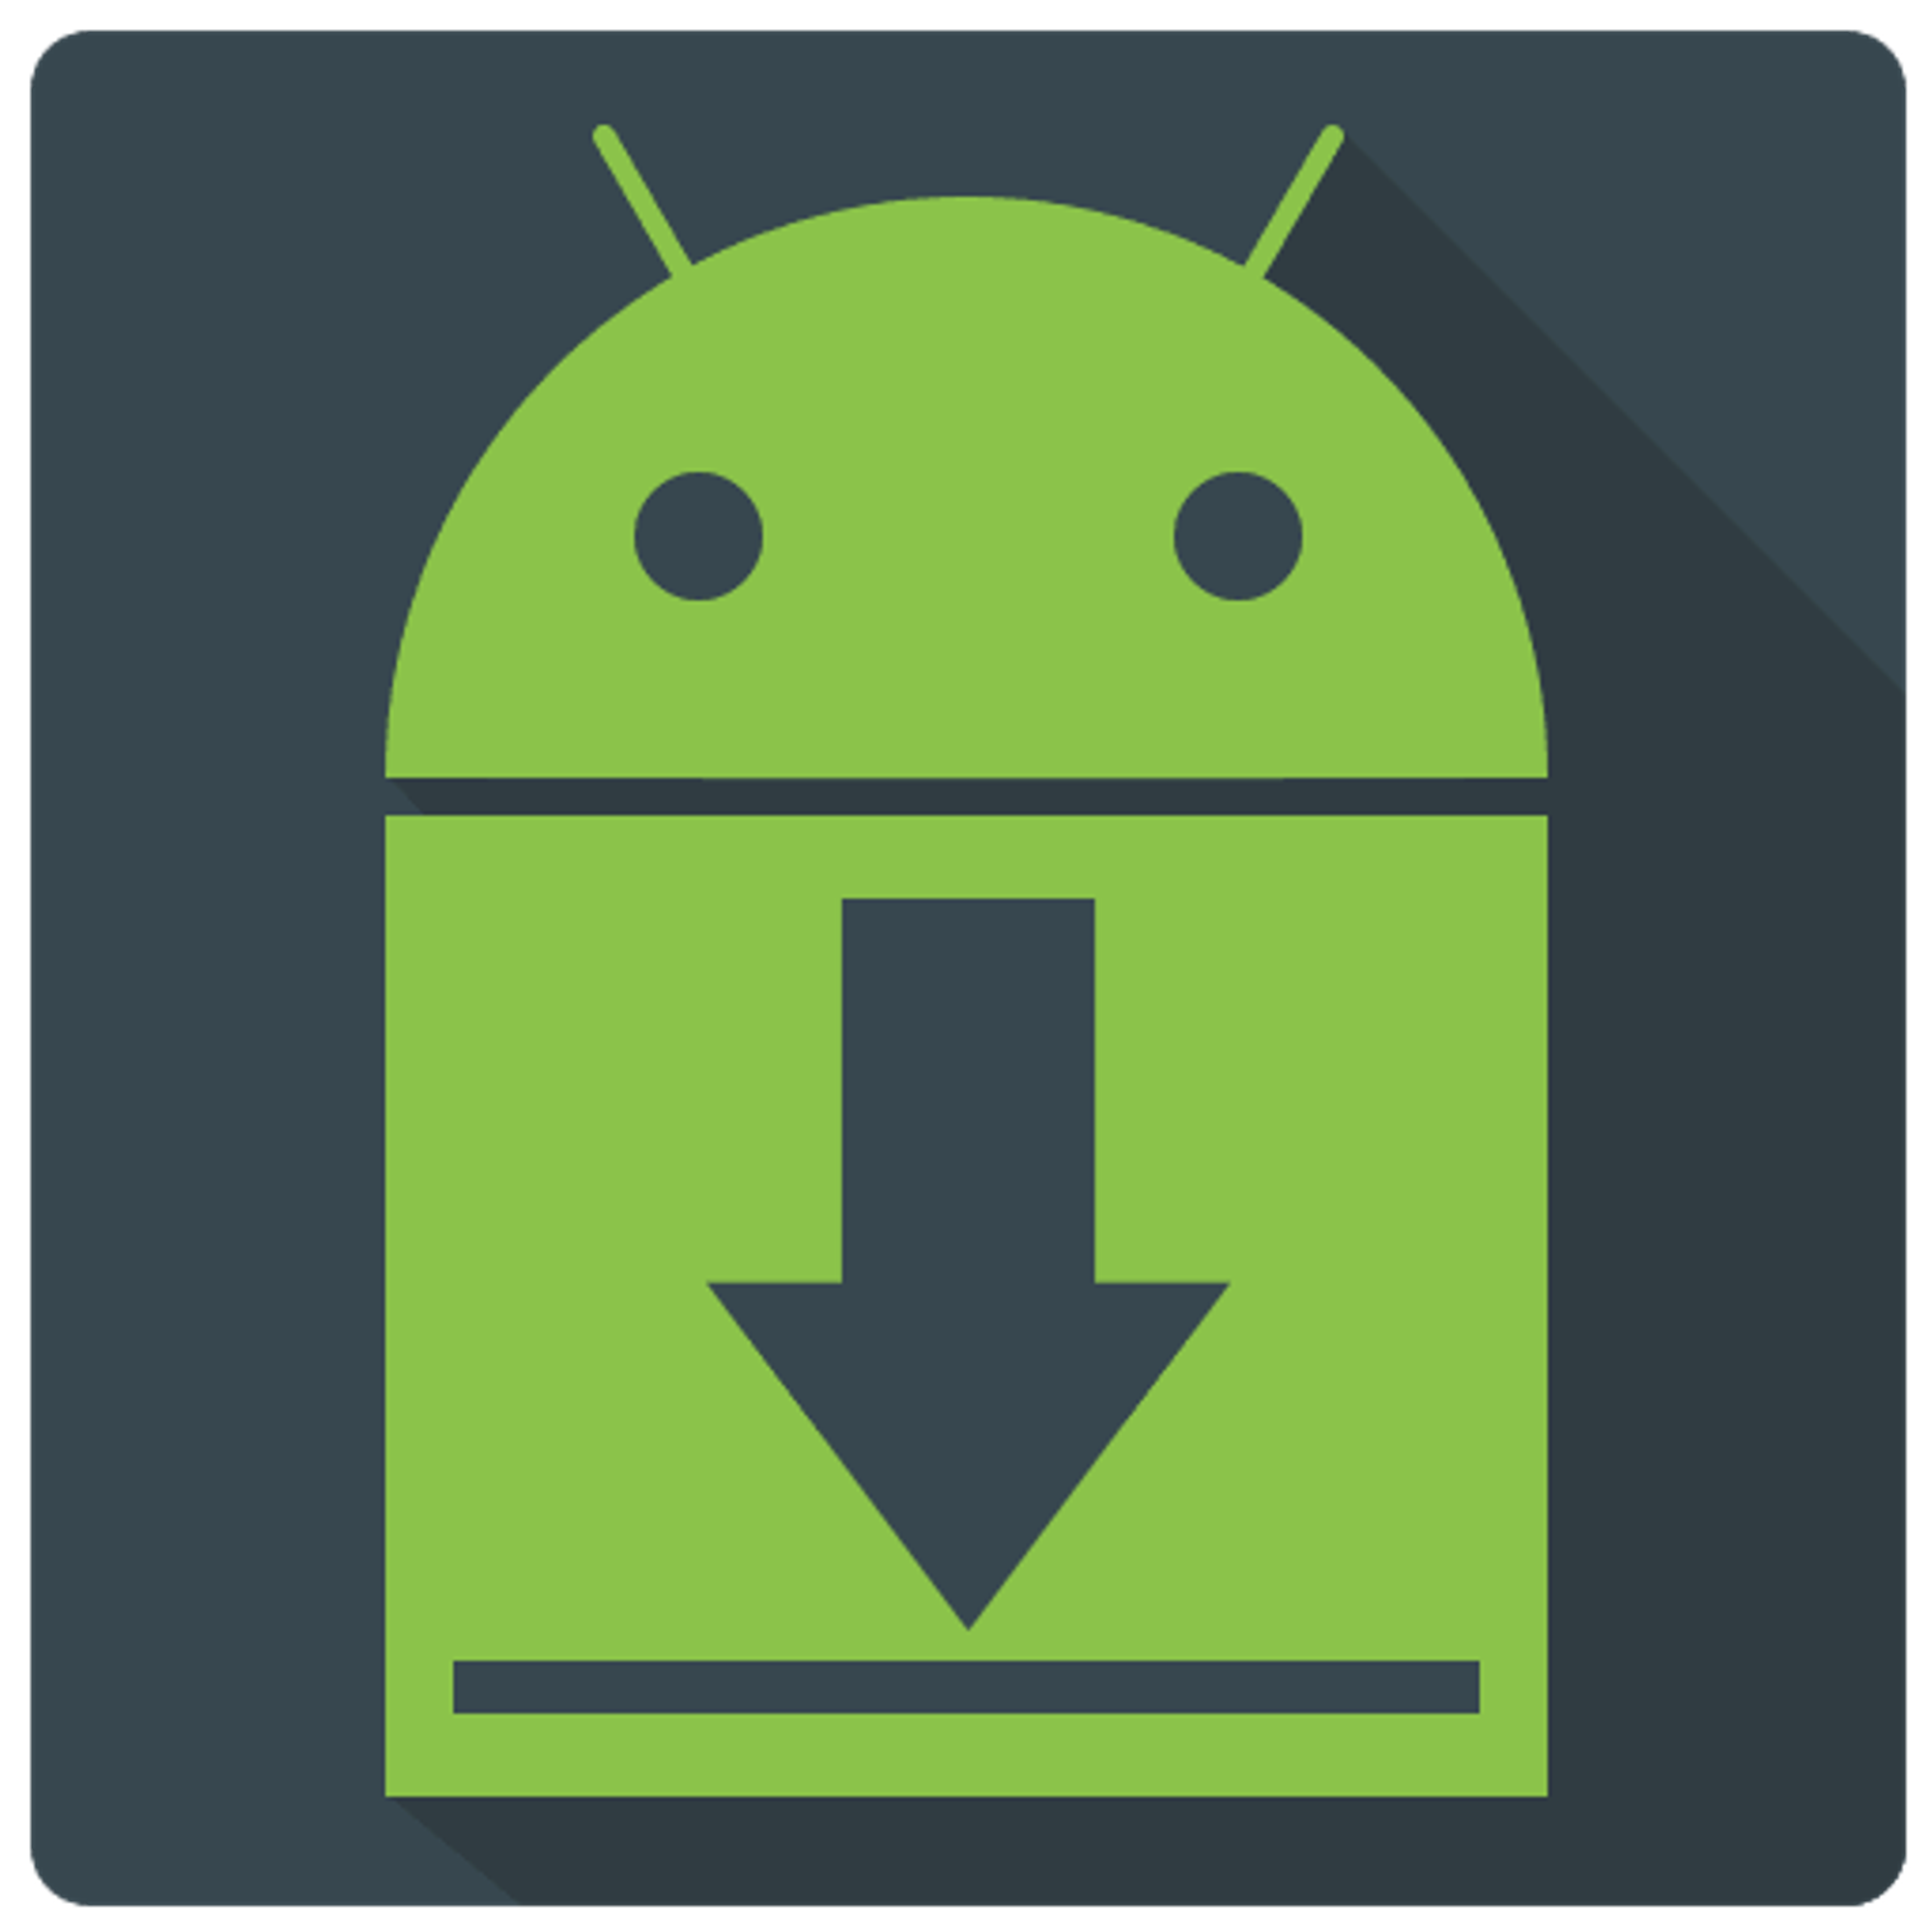 Loader Droid download manager - Apps on Google Play